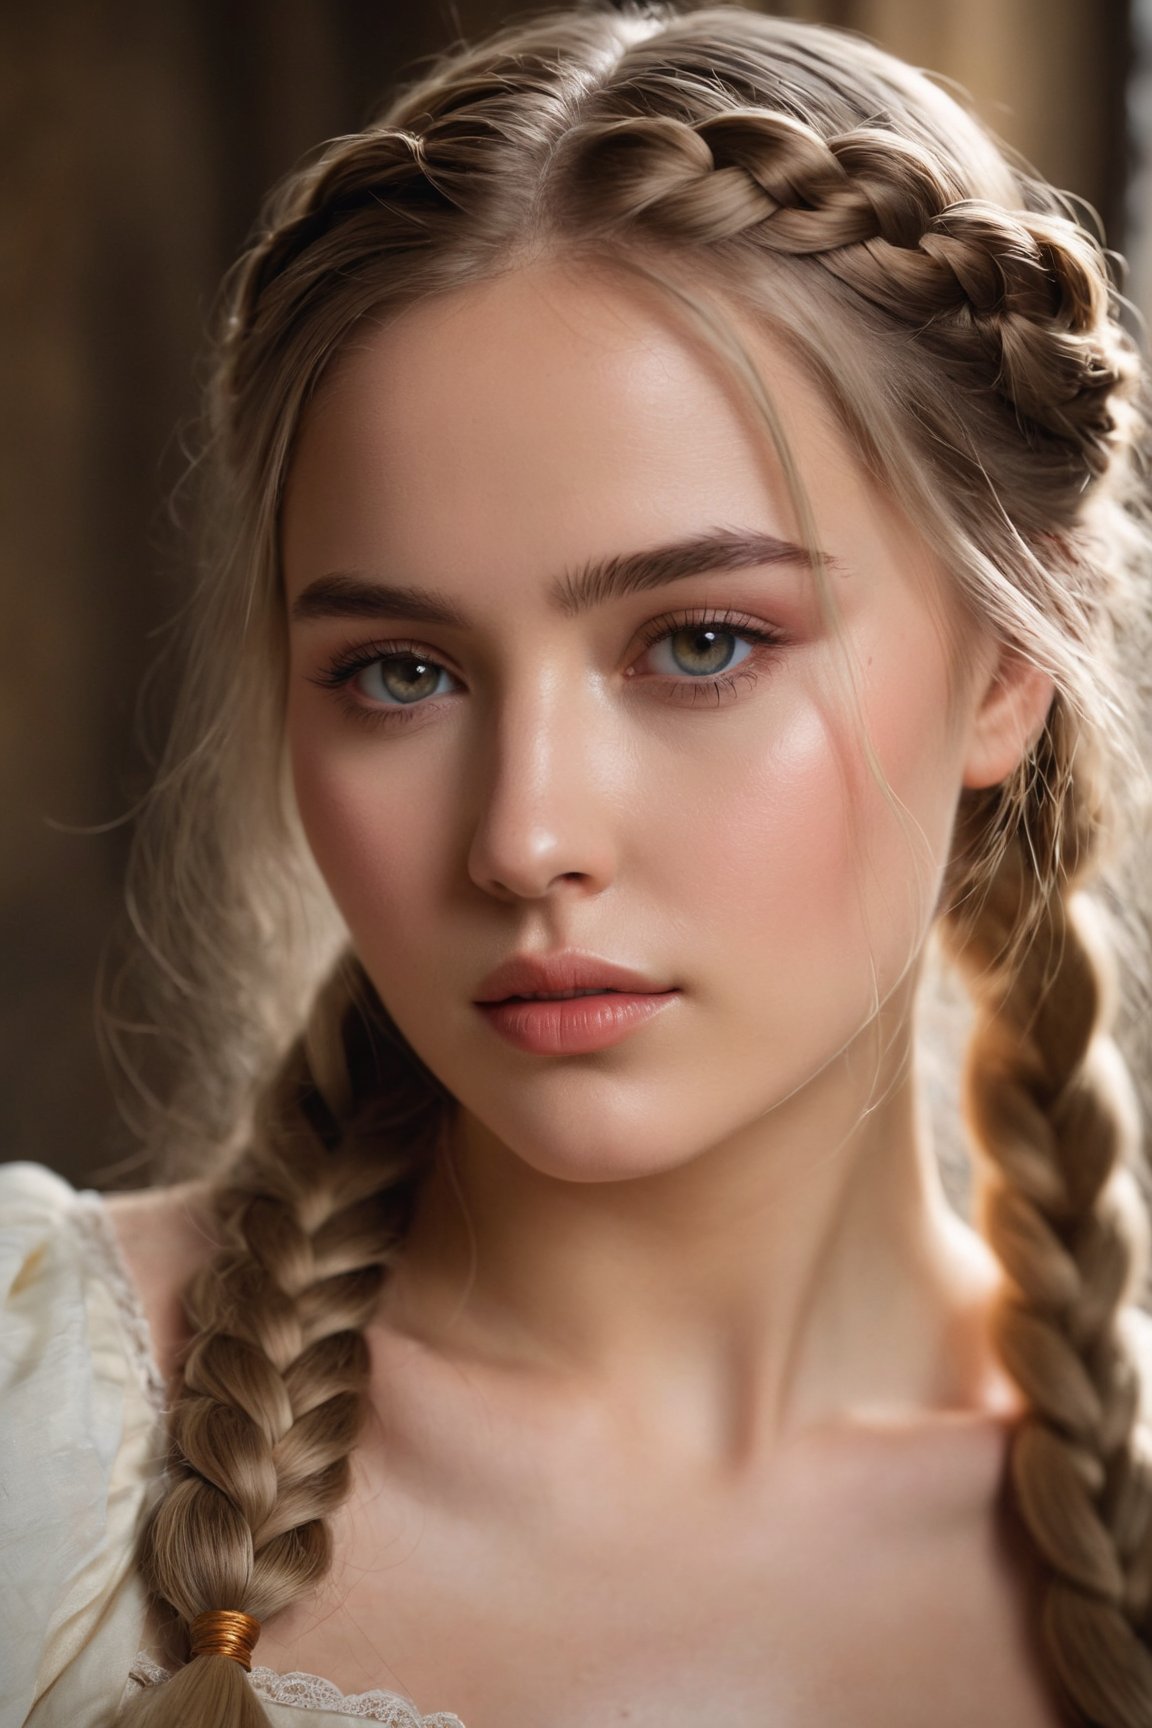 (best quality,8K,highres,masterpiece), featuring a captivating portrait of a beautiful young Nordic woman. Her long hair, intricately braided, catches the subtle glow of ambient light filtering in from the side, highlighting her features with a natural warmth. The glossy fullness of her lips, slightly parted as if caught in a moment of contemplation, adds to her sultry and fertile expression. Her eyes, hazy and dreamy, convey a depth of emotion, enhanced by delicately blushed cheeks and the hint of a lip bite that suggests a blend of innocence and allure. The light makeup emphasizes her natural beauty, complementing her warm, moist, and slightly oily complexion, indicative of health and vitality. This scene is set against a medieval exterior environment, where the historical ambiance adds a timeless quality to the portrait, immersing the viewer in a moment suspended between the past and the ethereal beauty of the subject.